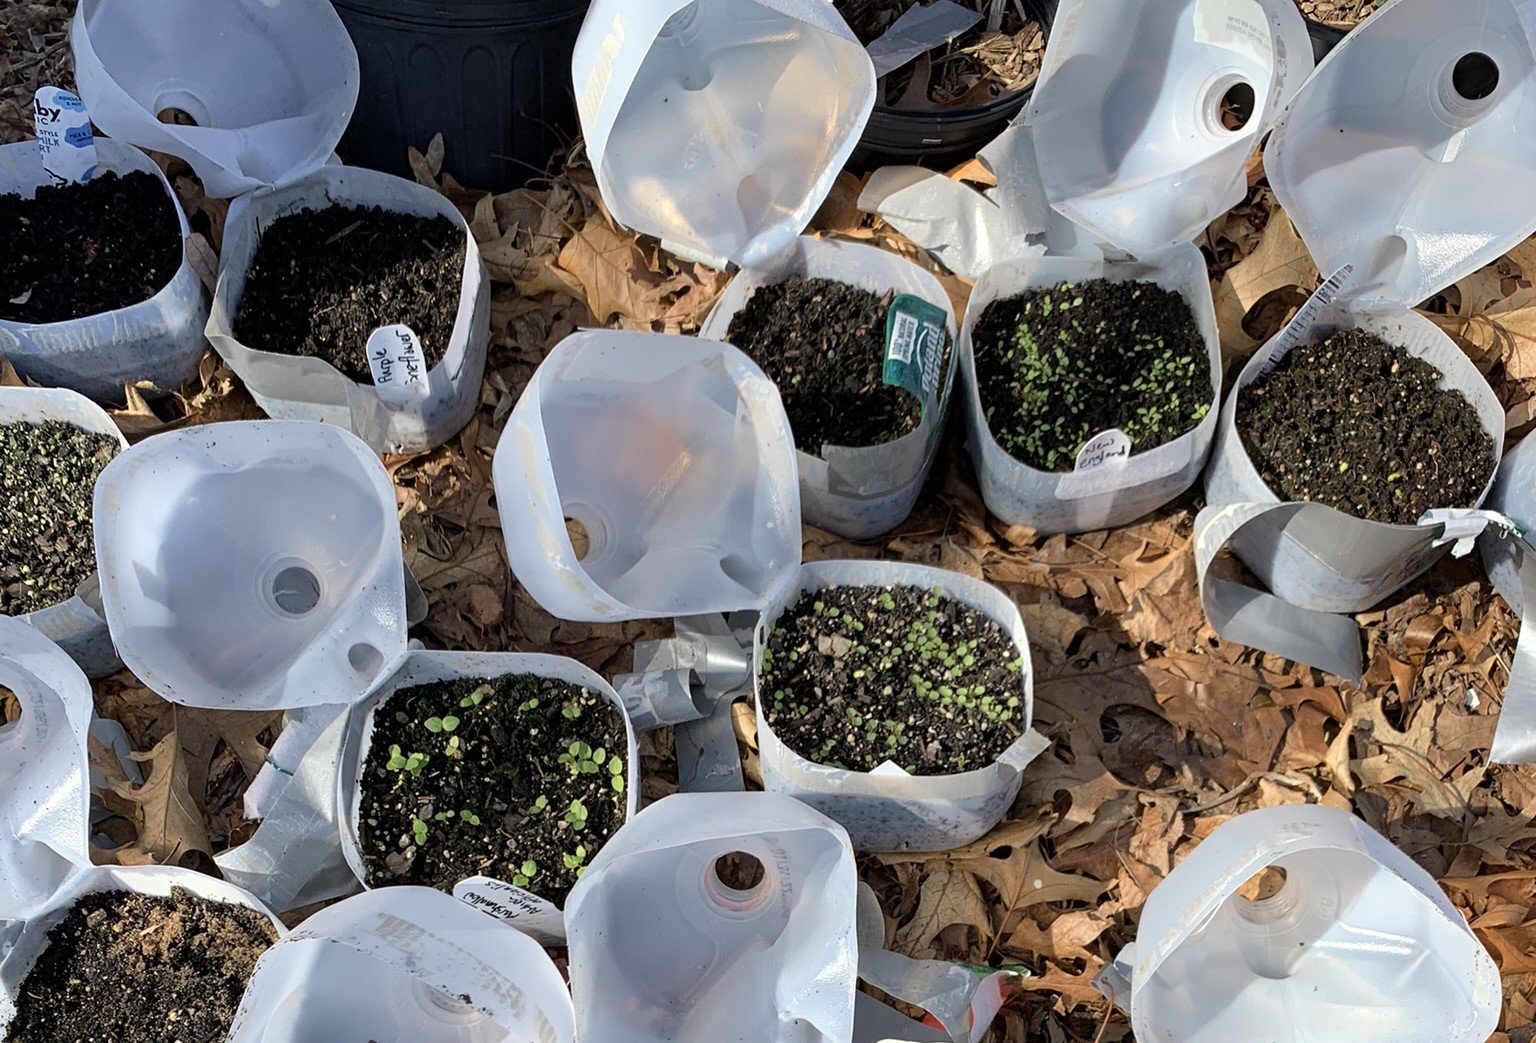 A photo of an array of milk jugs being used to grow seeds.